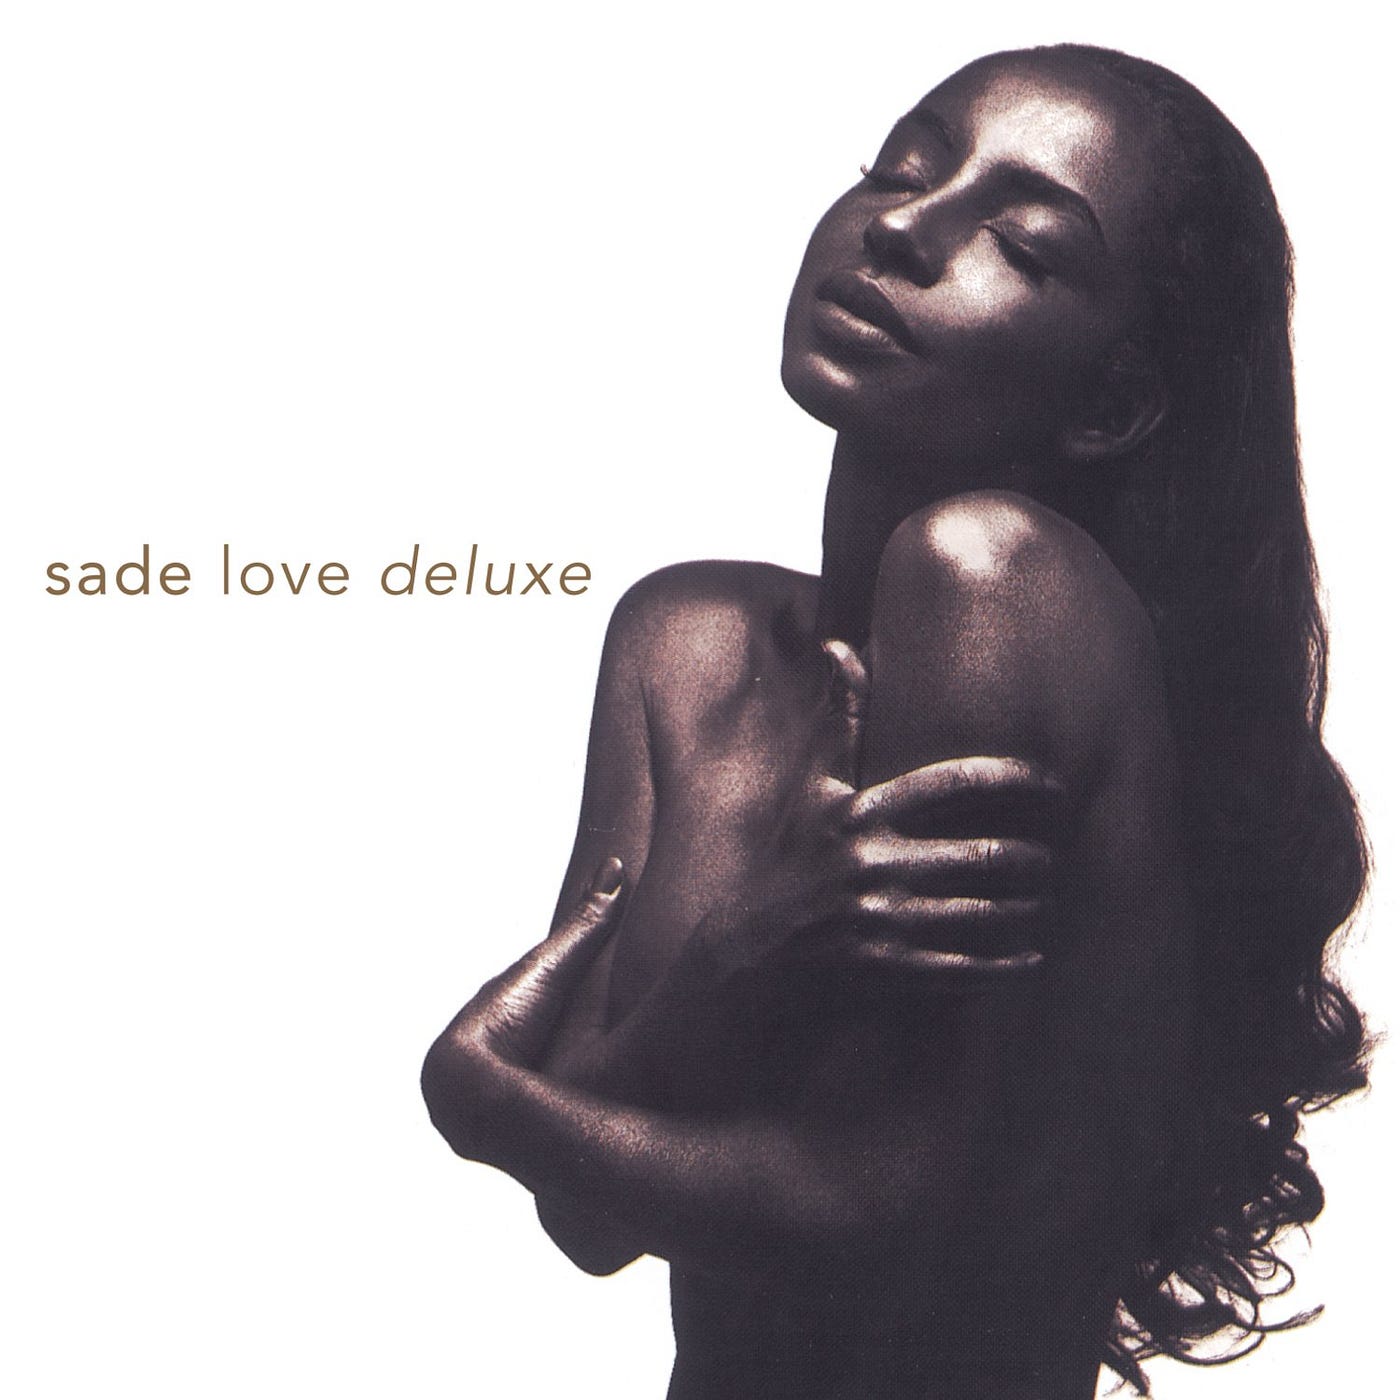 Meaning of Your Love Is King by Sade